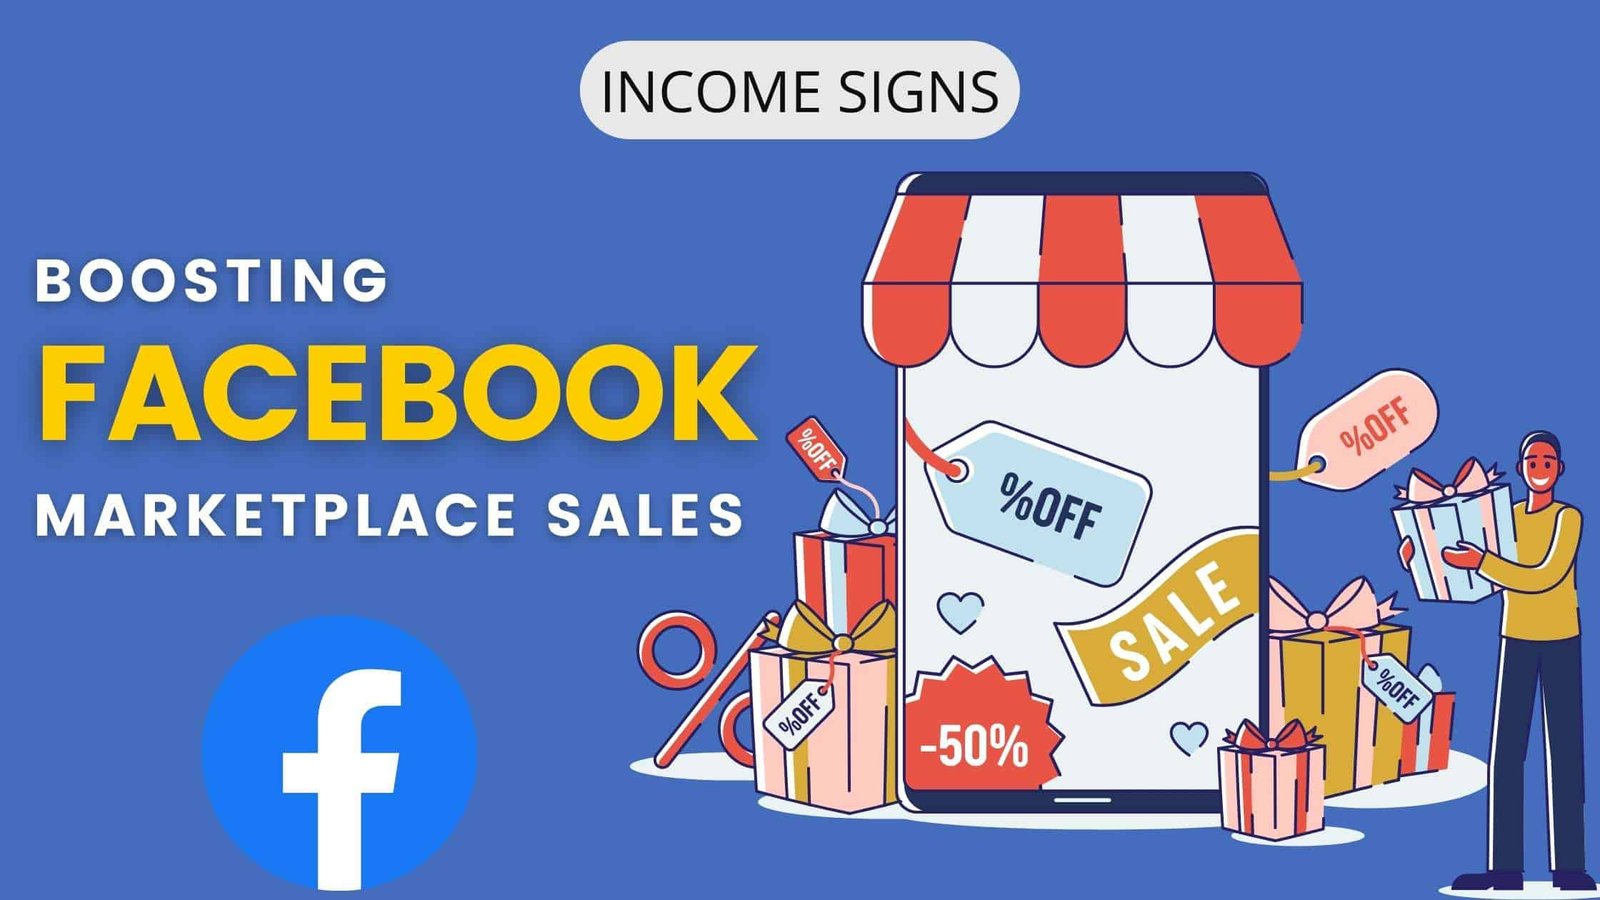 Boosting Your Facebook Marketplace Sales